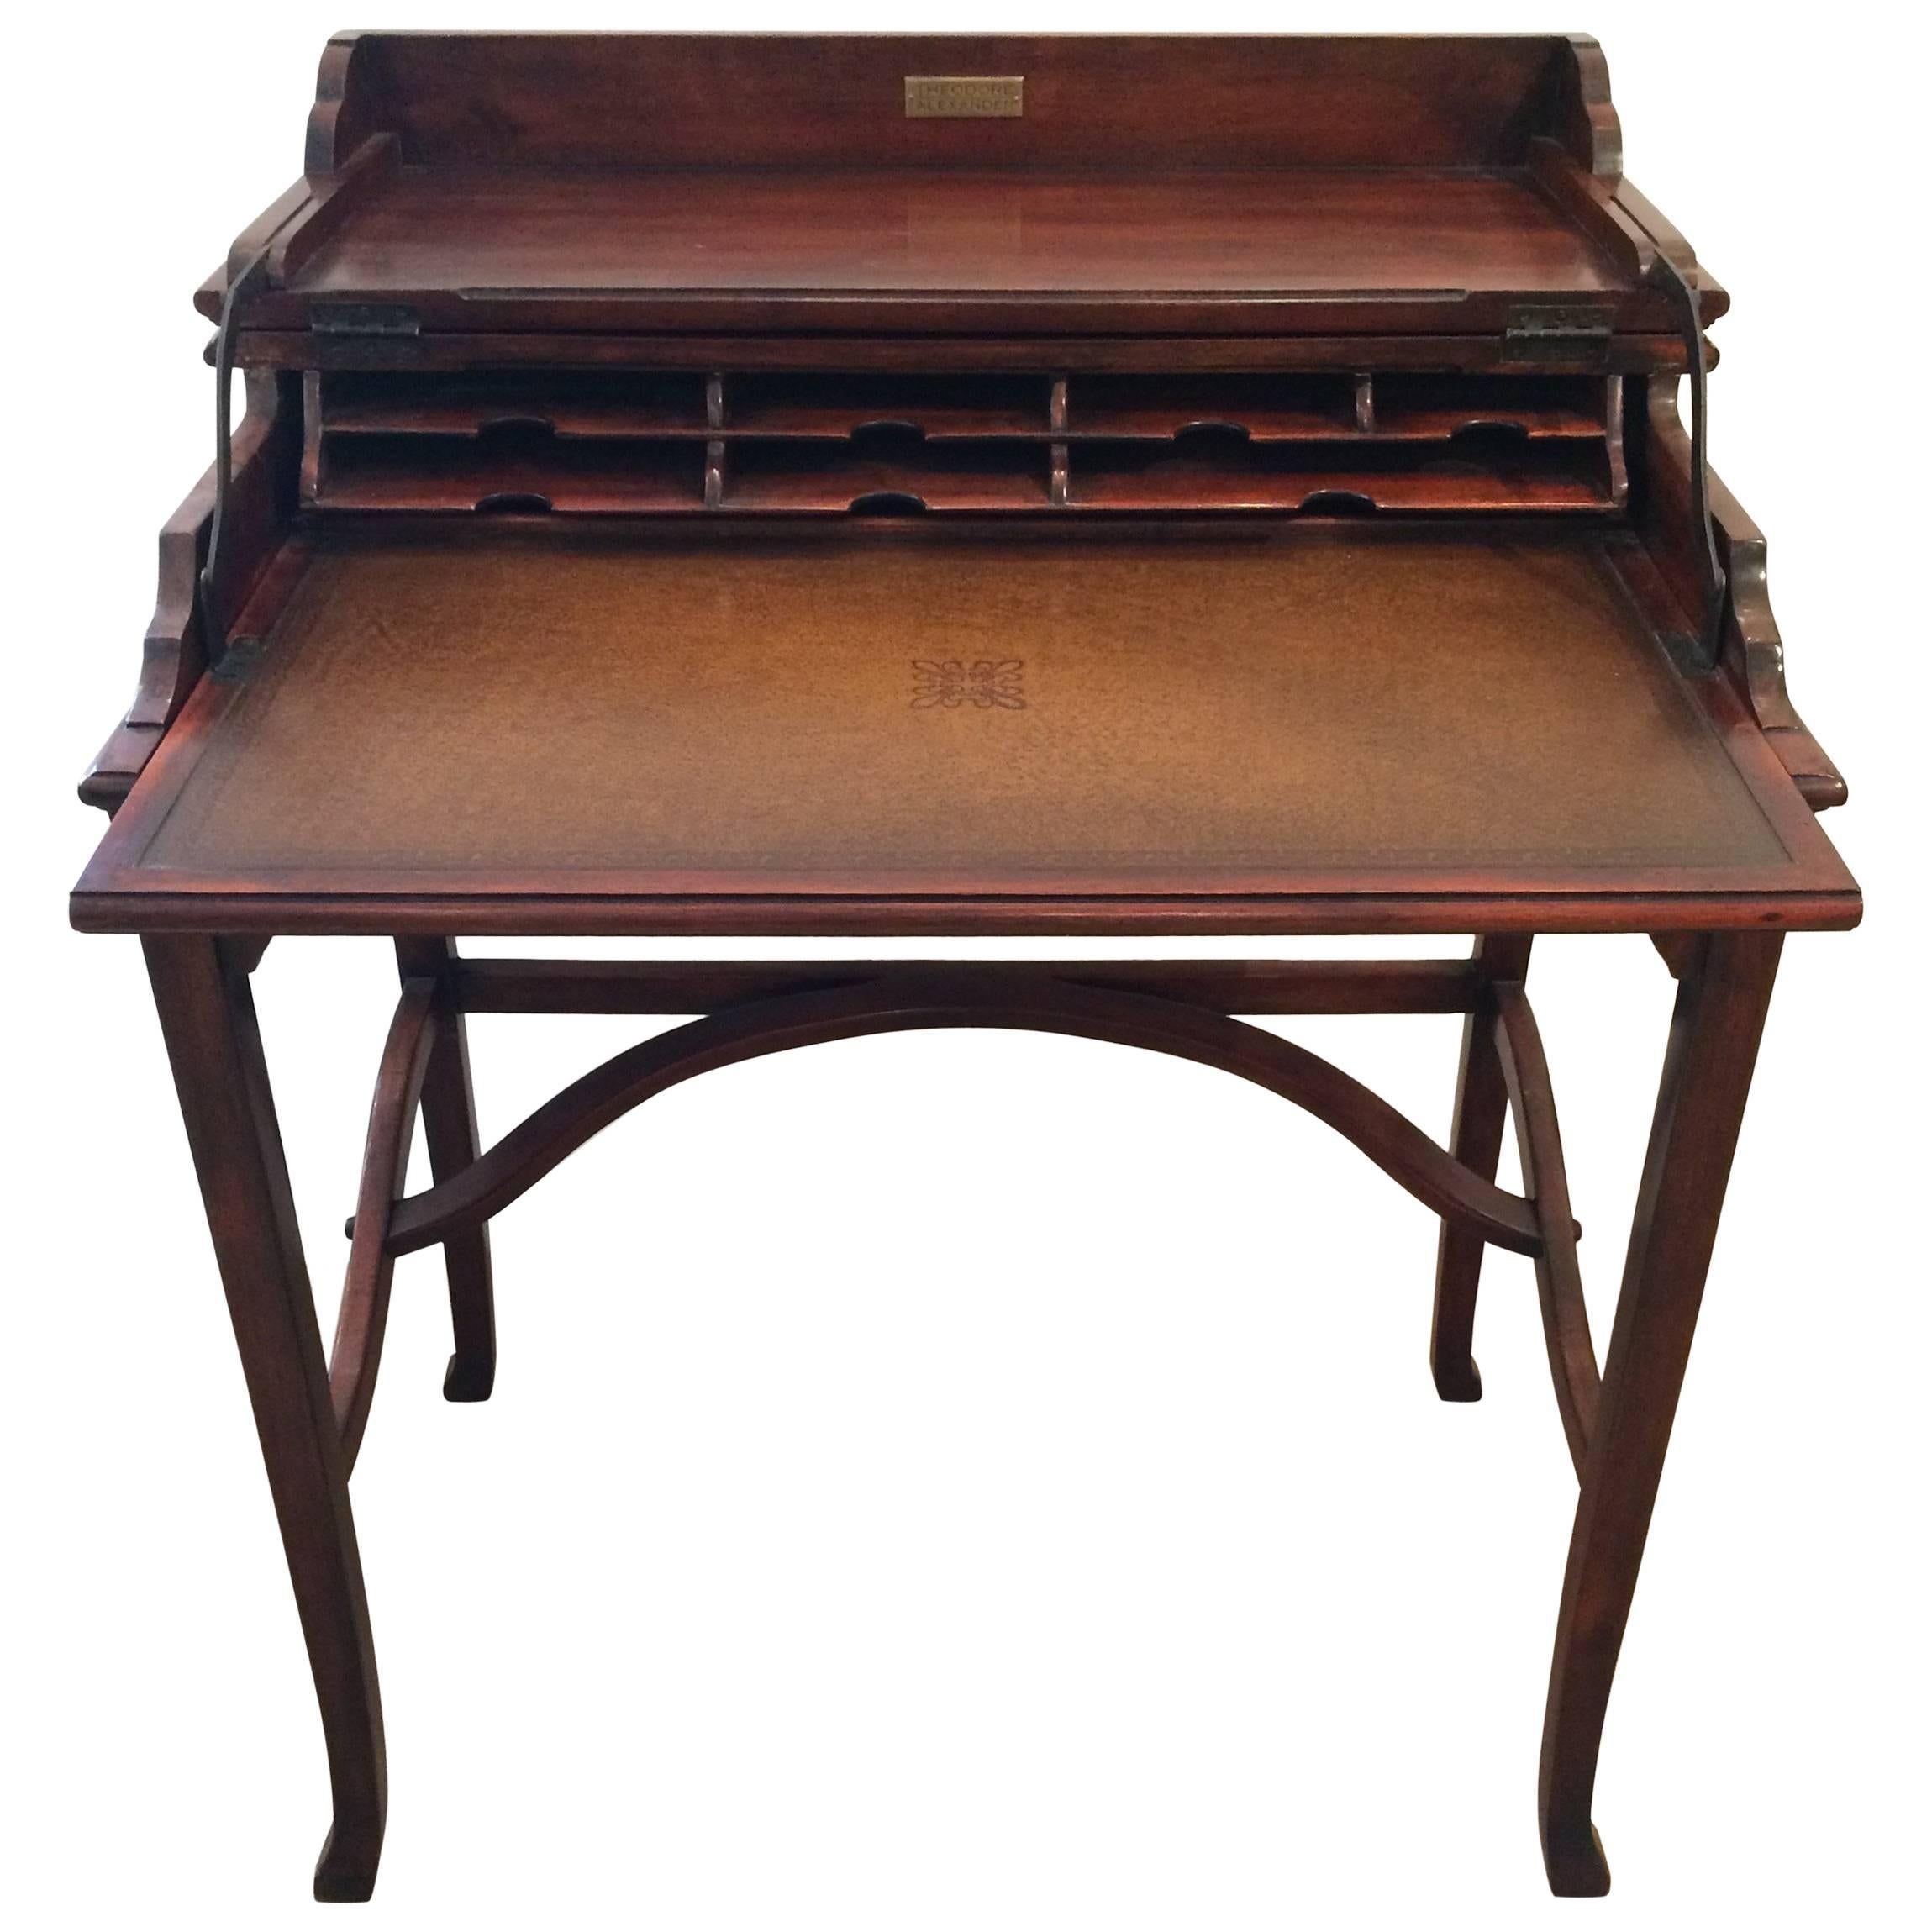 Exquisite Campaign Style Mahogany and Leather Folding Writing Desk